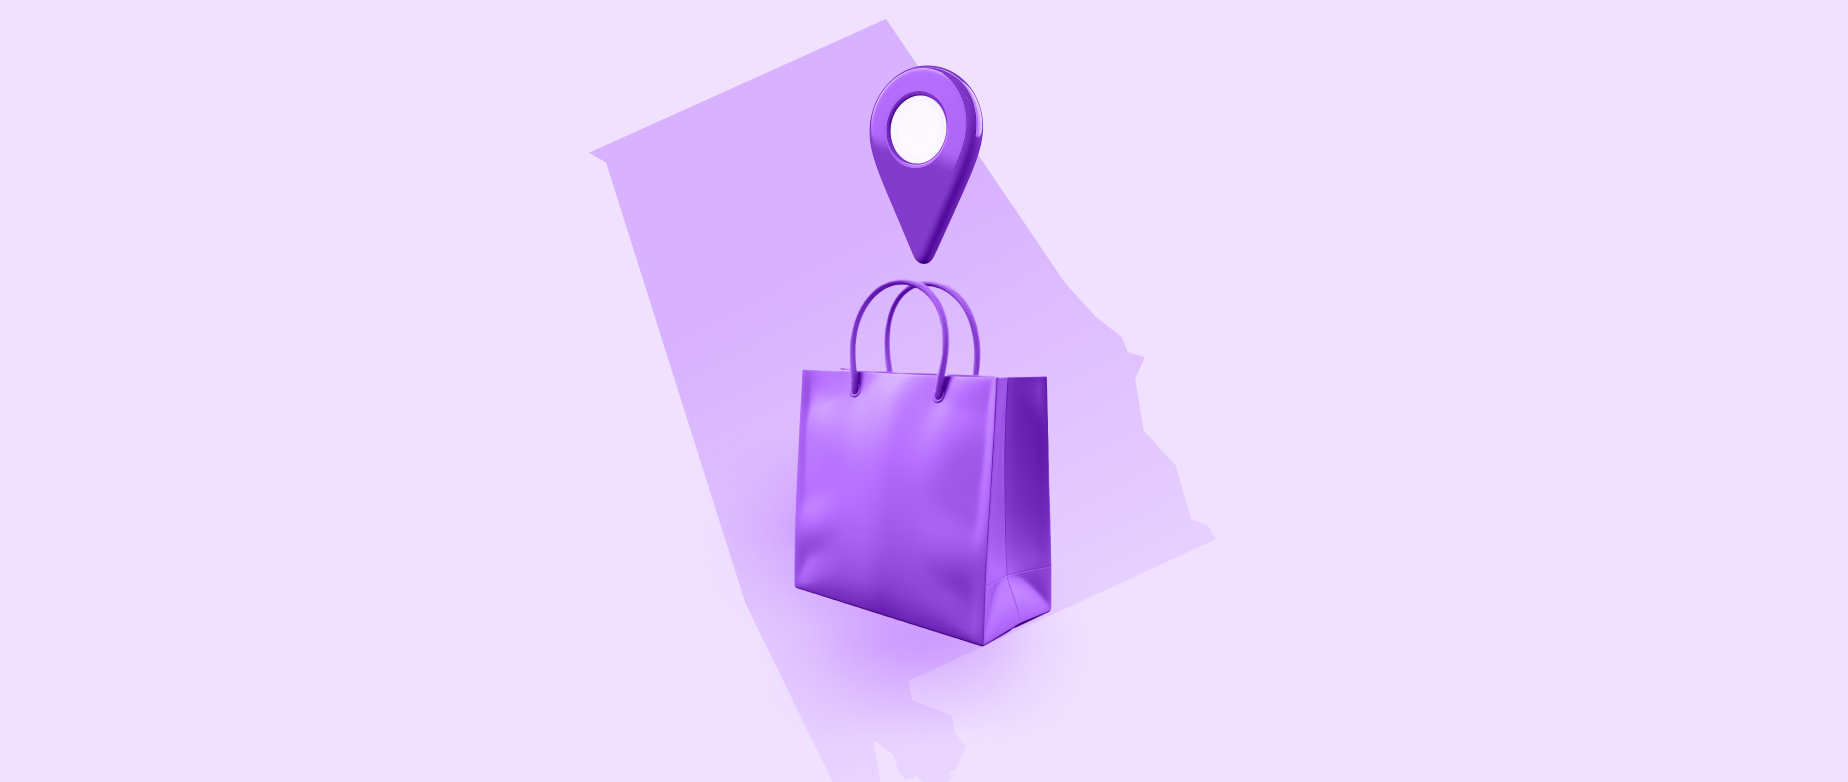 Purple outline of the state of Alabama with a shopping bag and location icon on a light purple background.